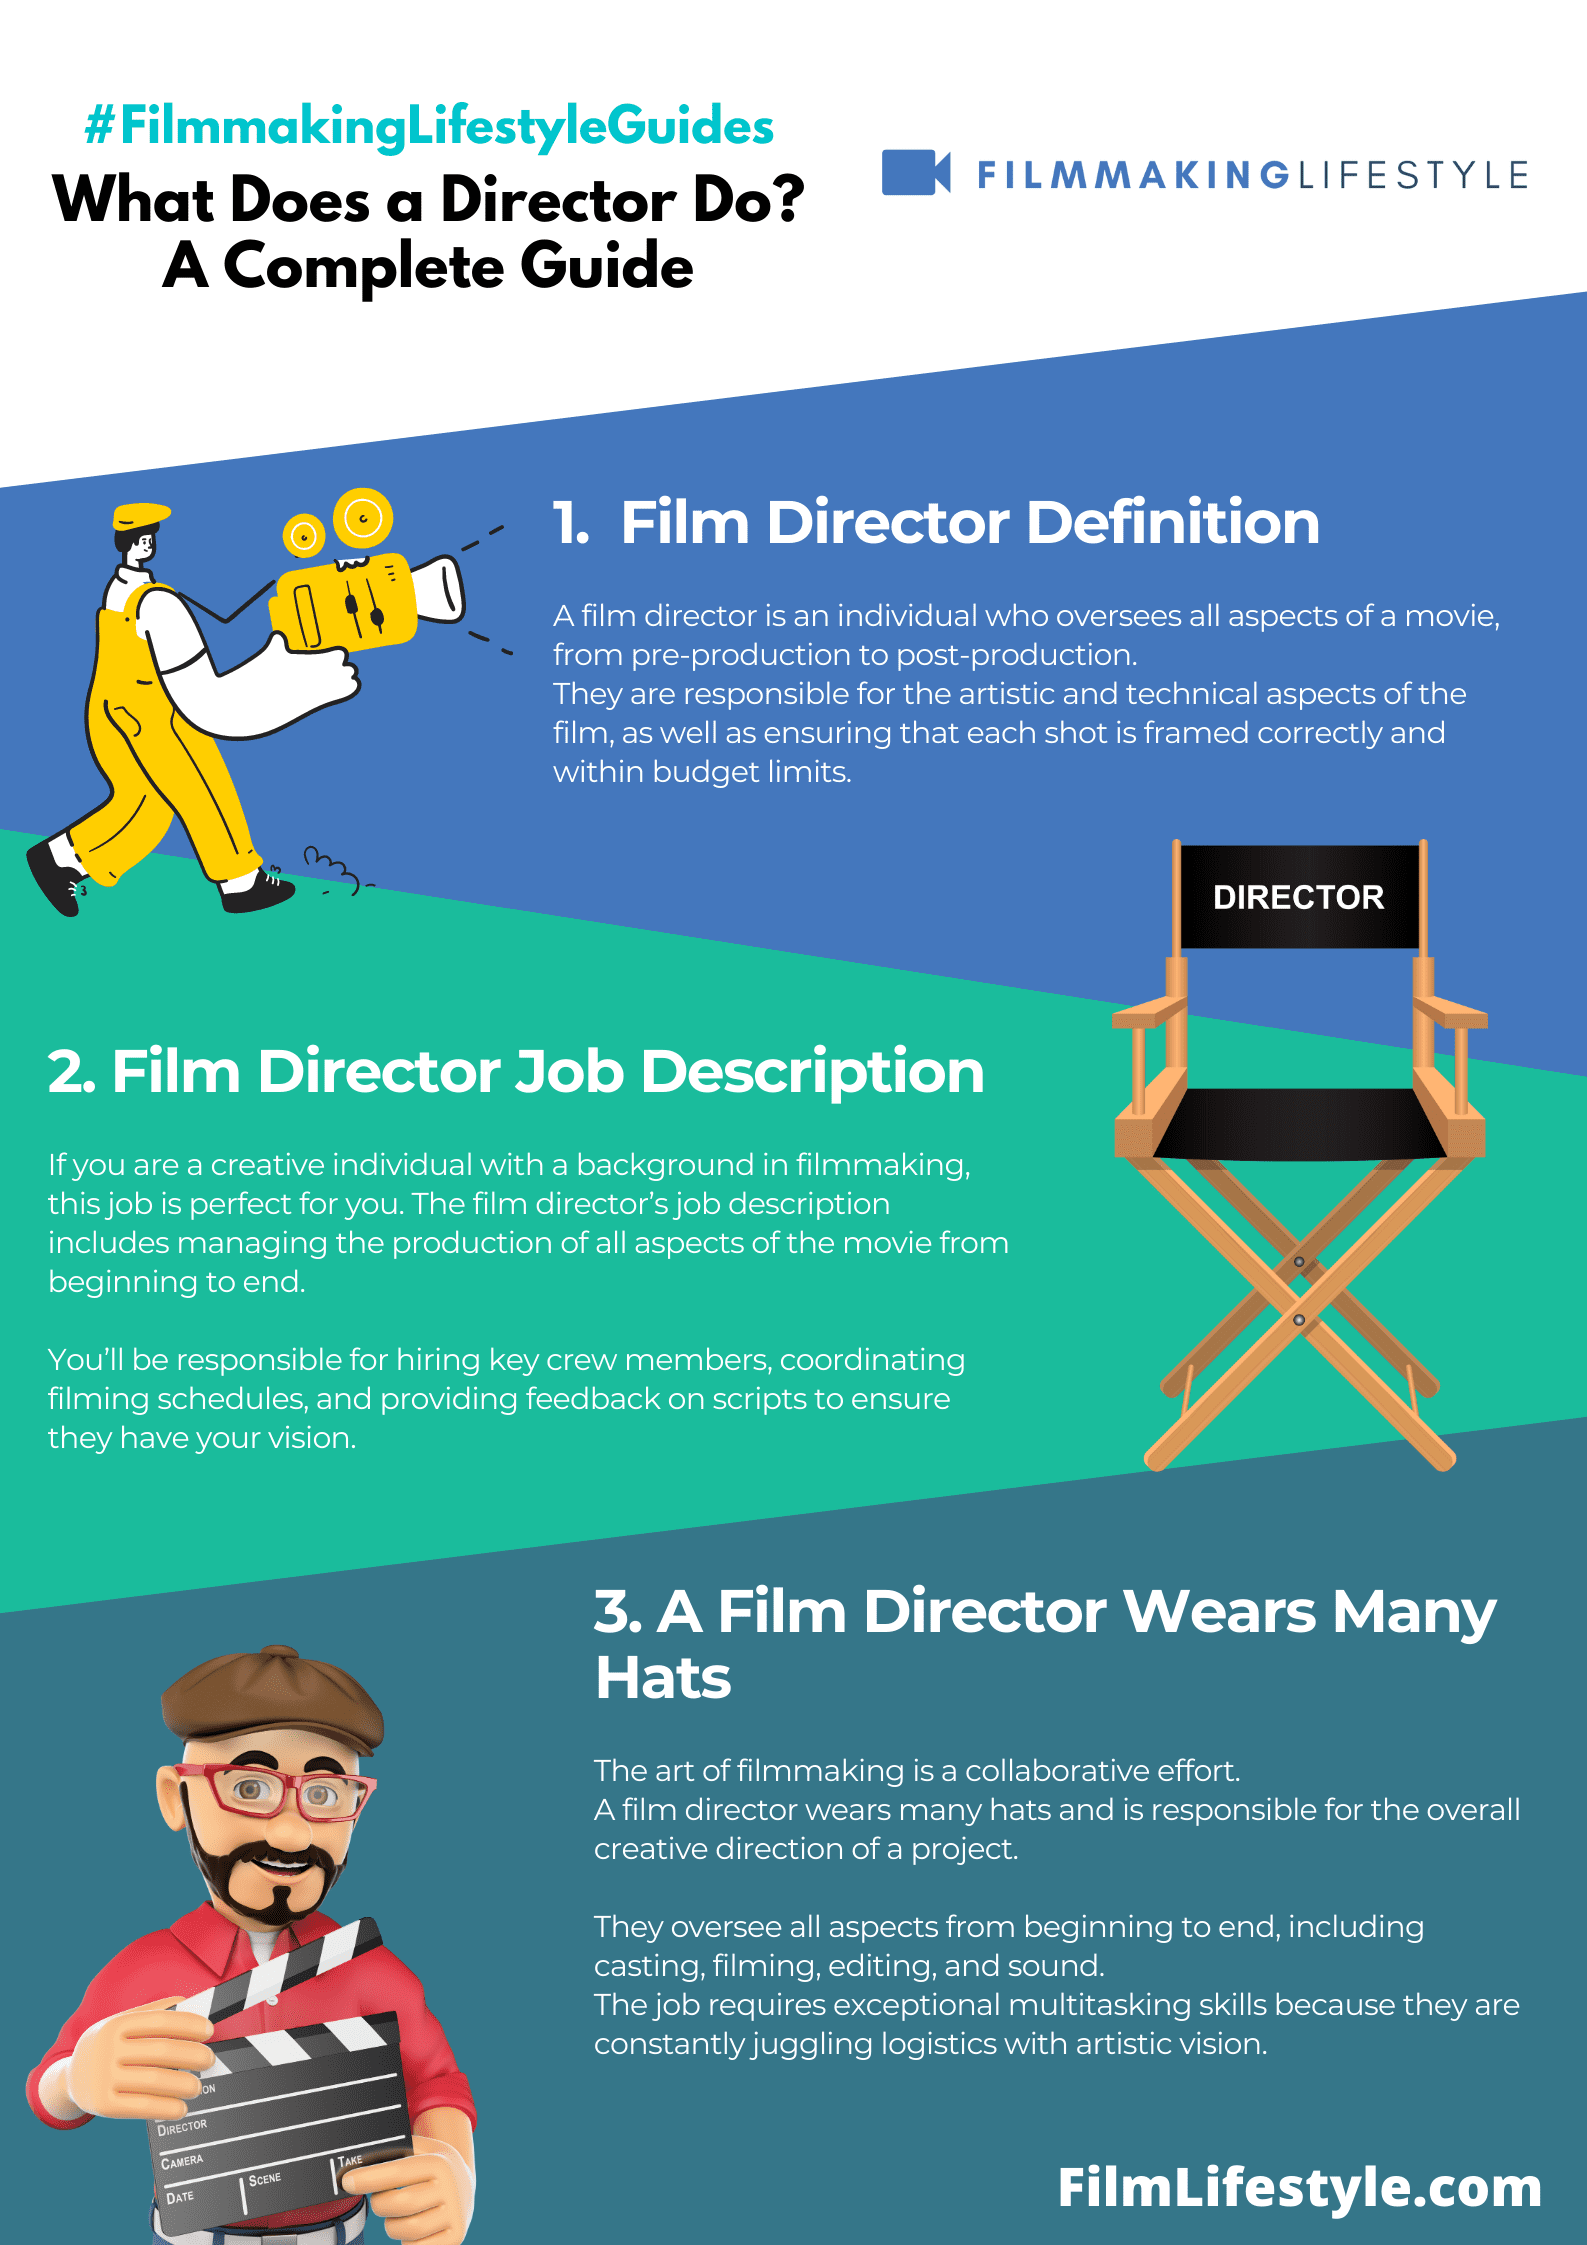 What Does a Director Do